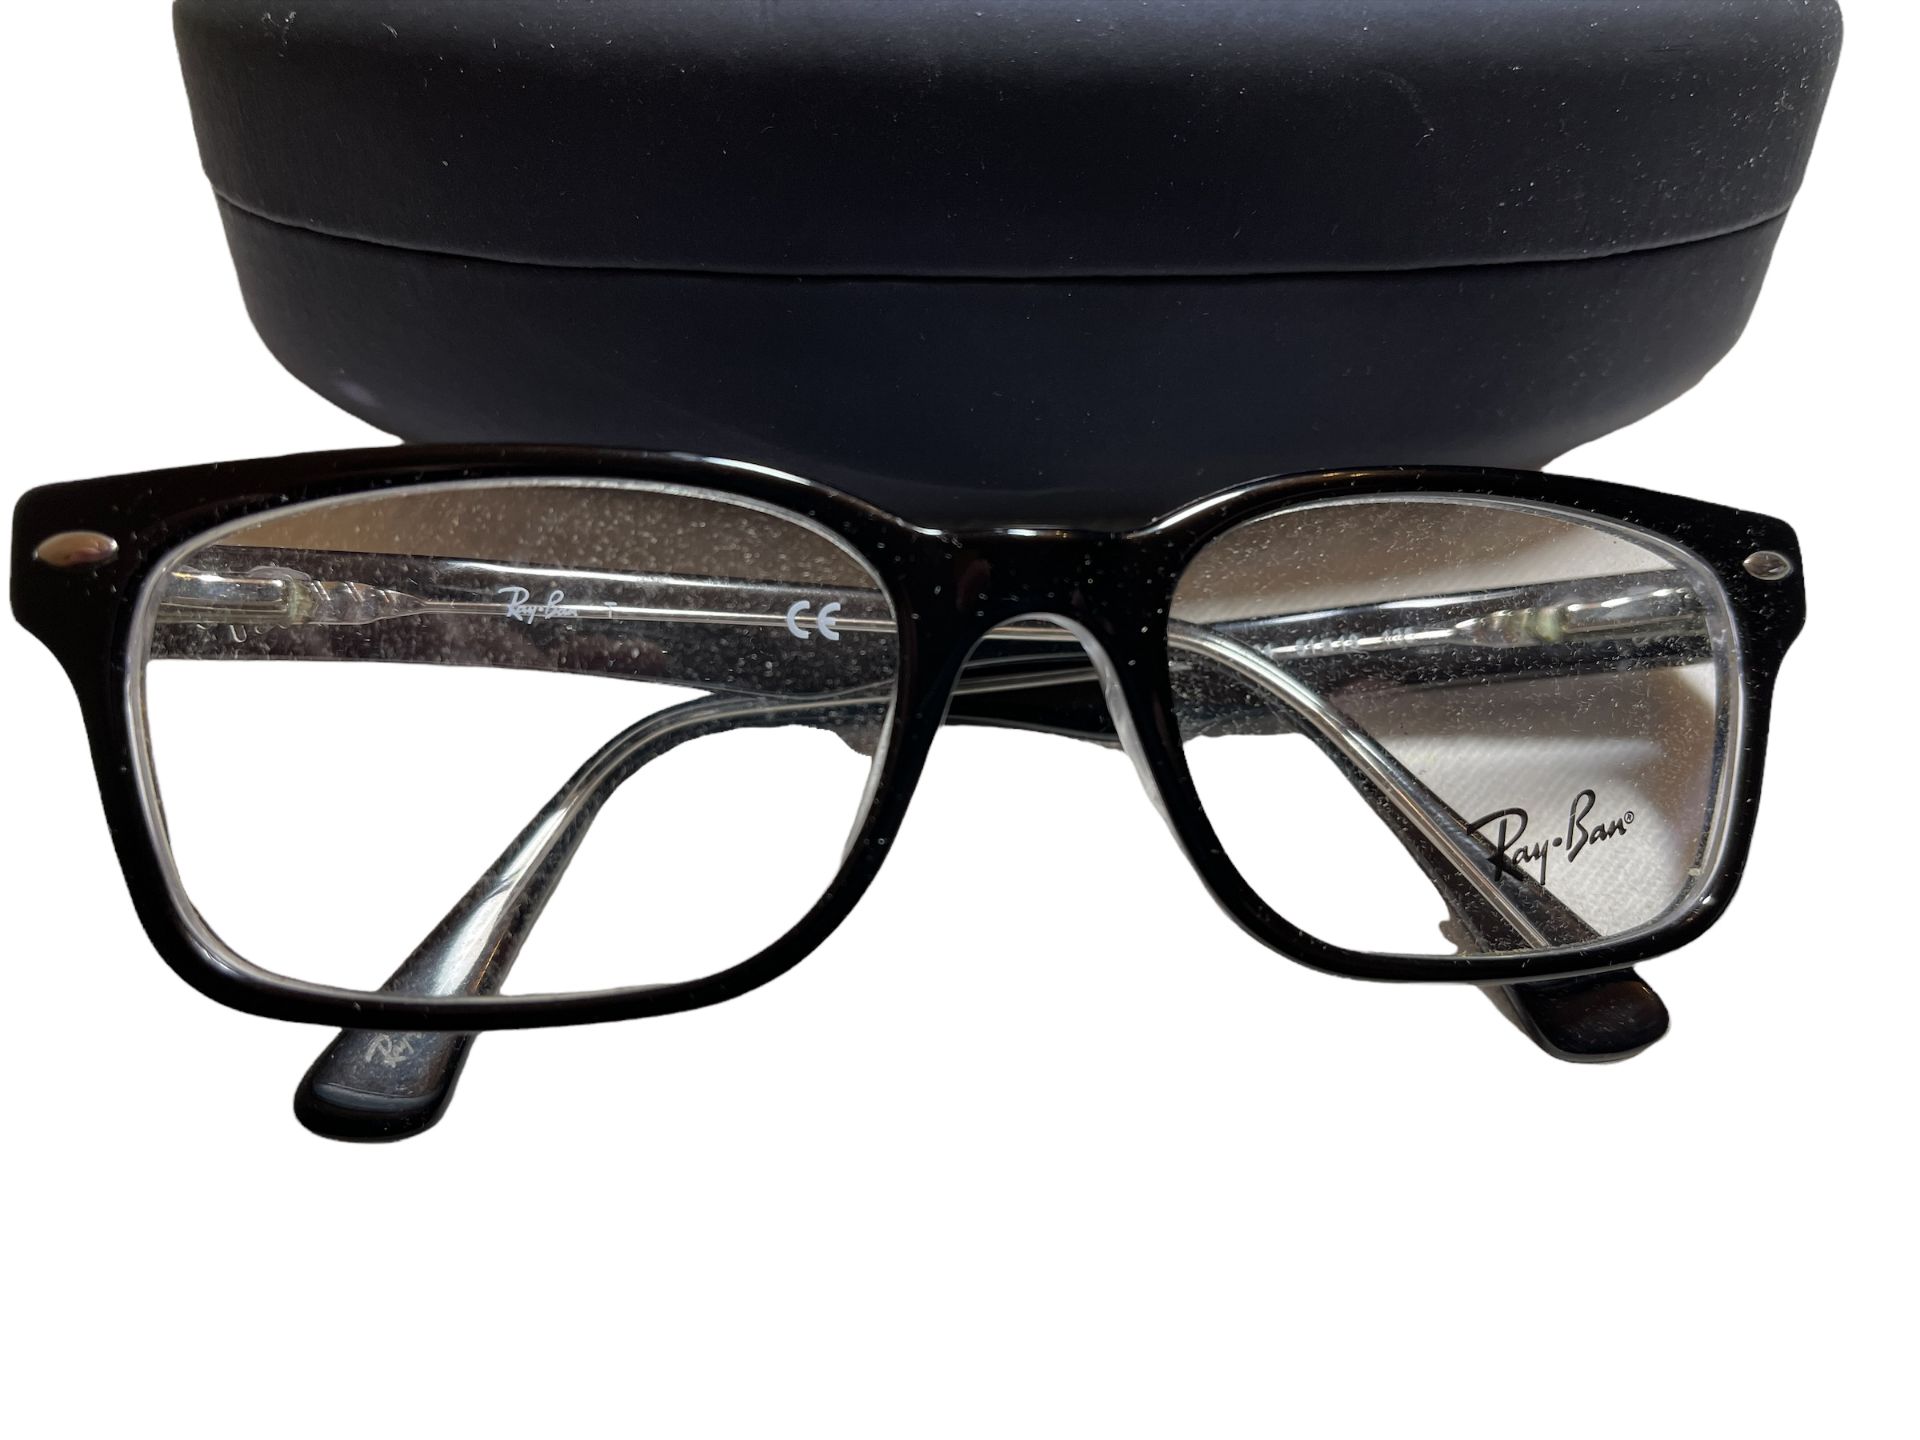 Rayban Spectacle Frames - Surplus Stock from Our Private Jet Charter